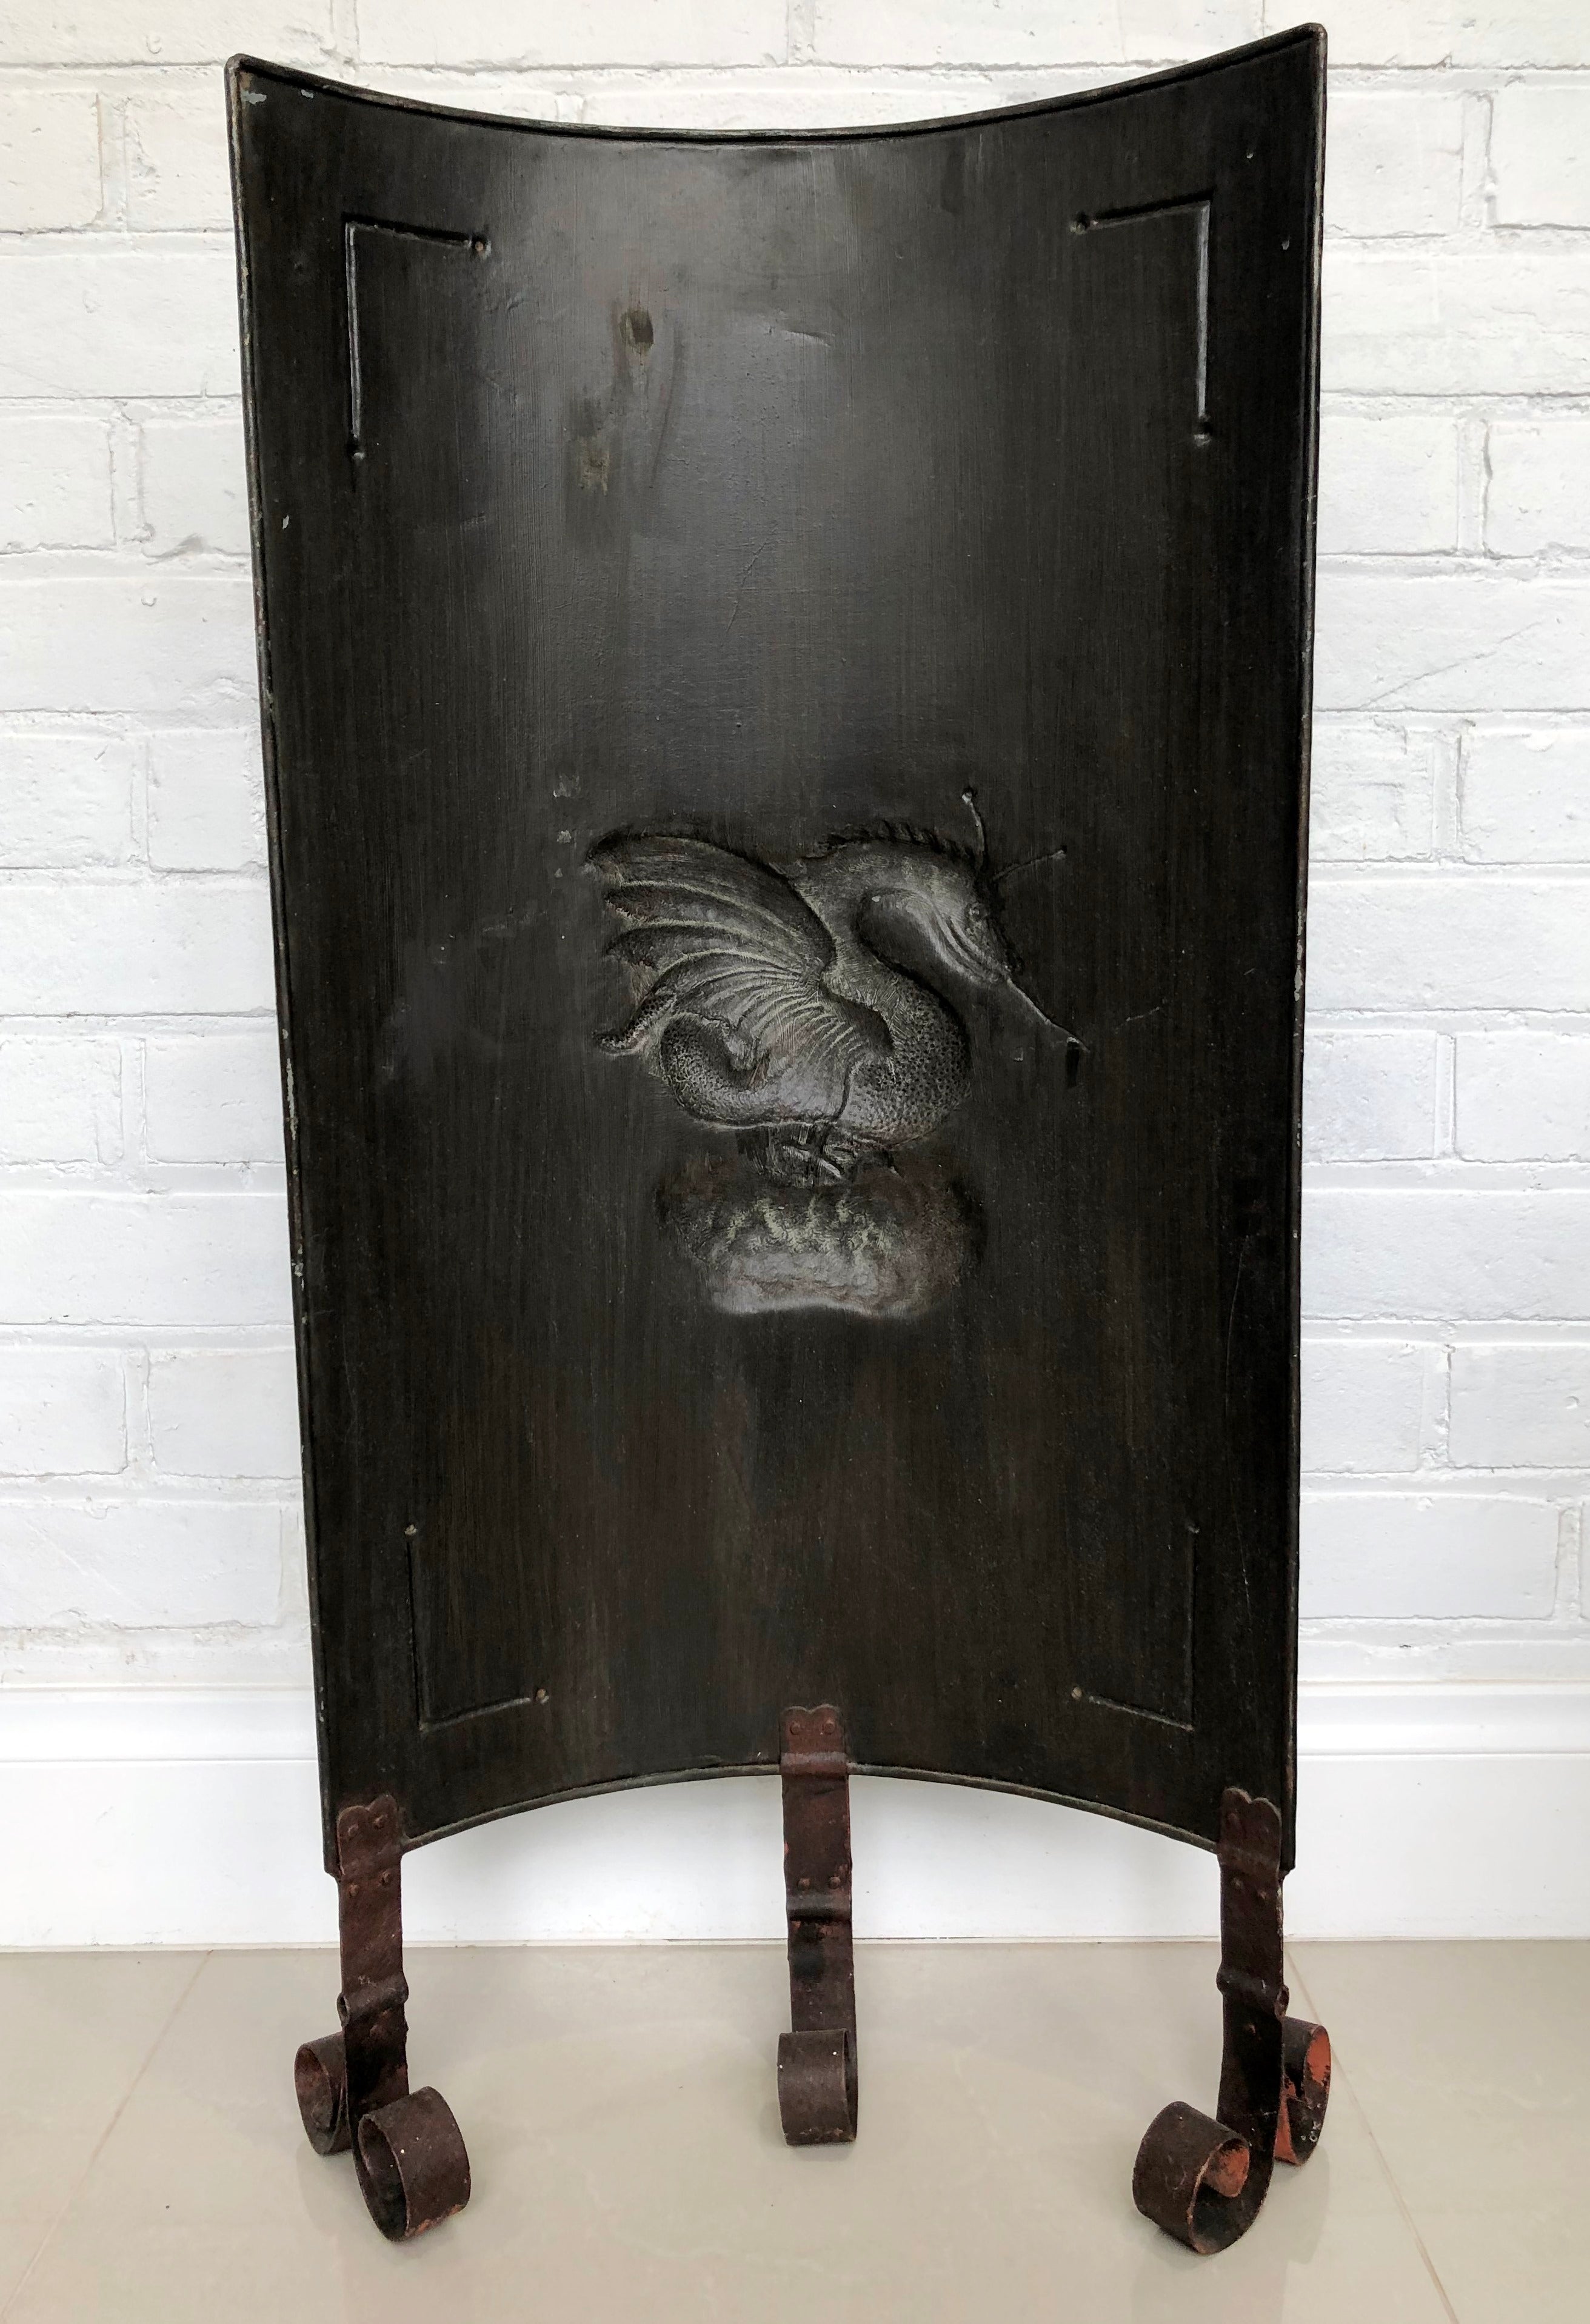 Vintage Medieval Style Dragon Fire Screen Guard | eXibit collection